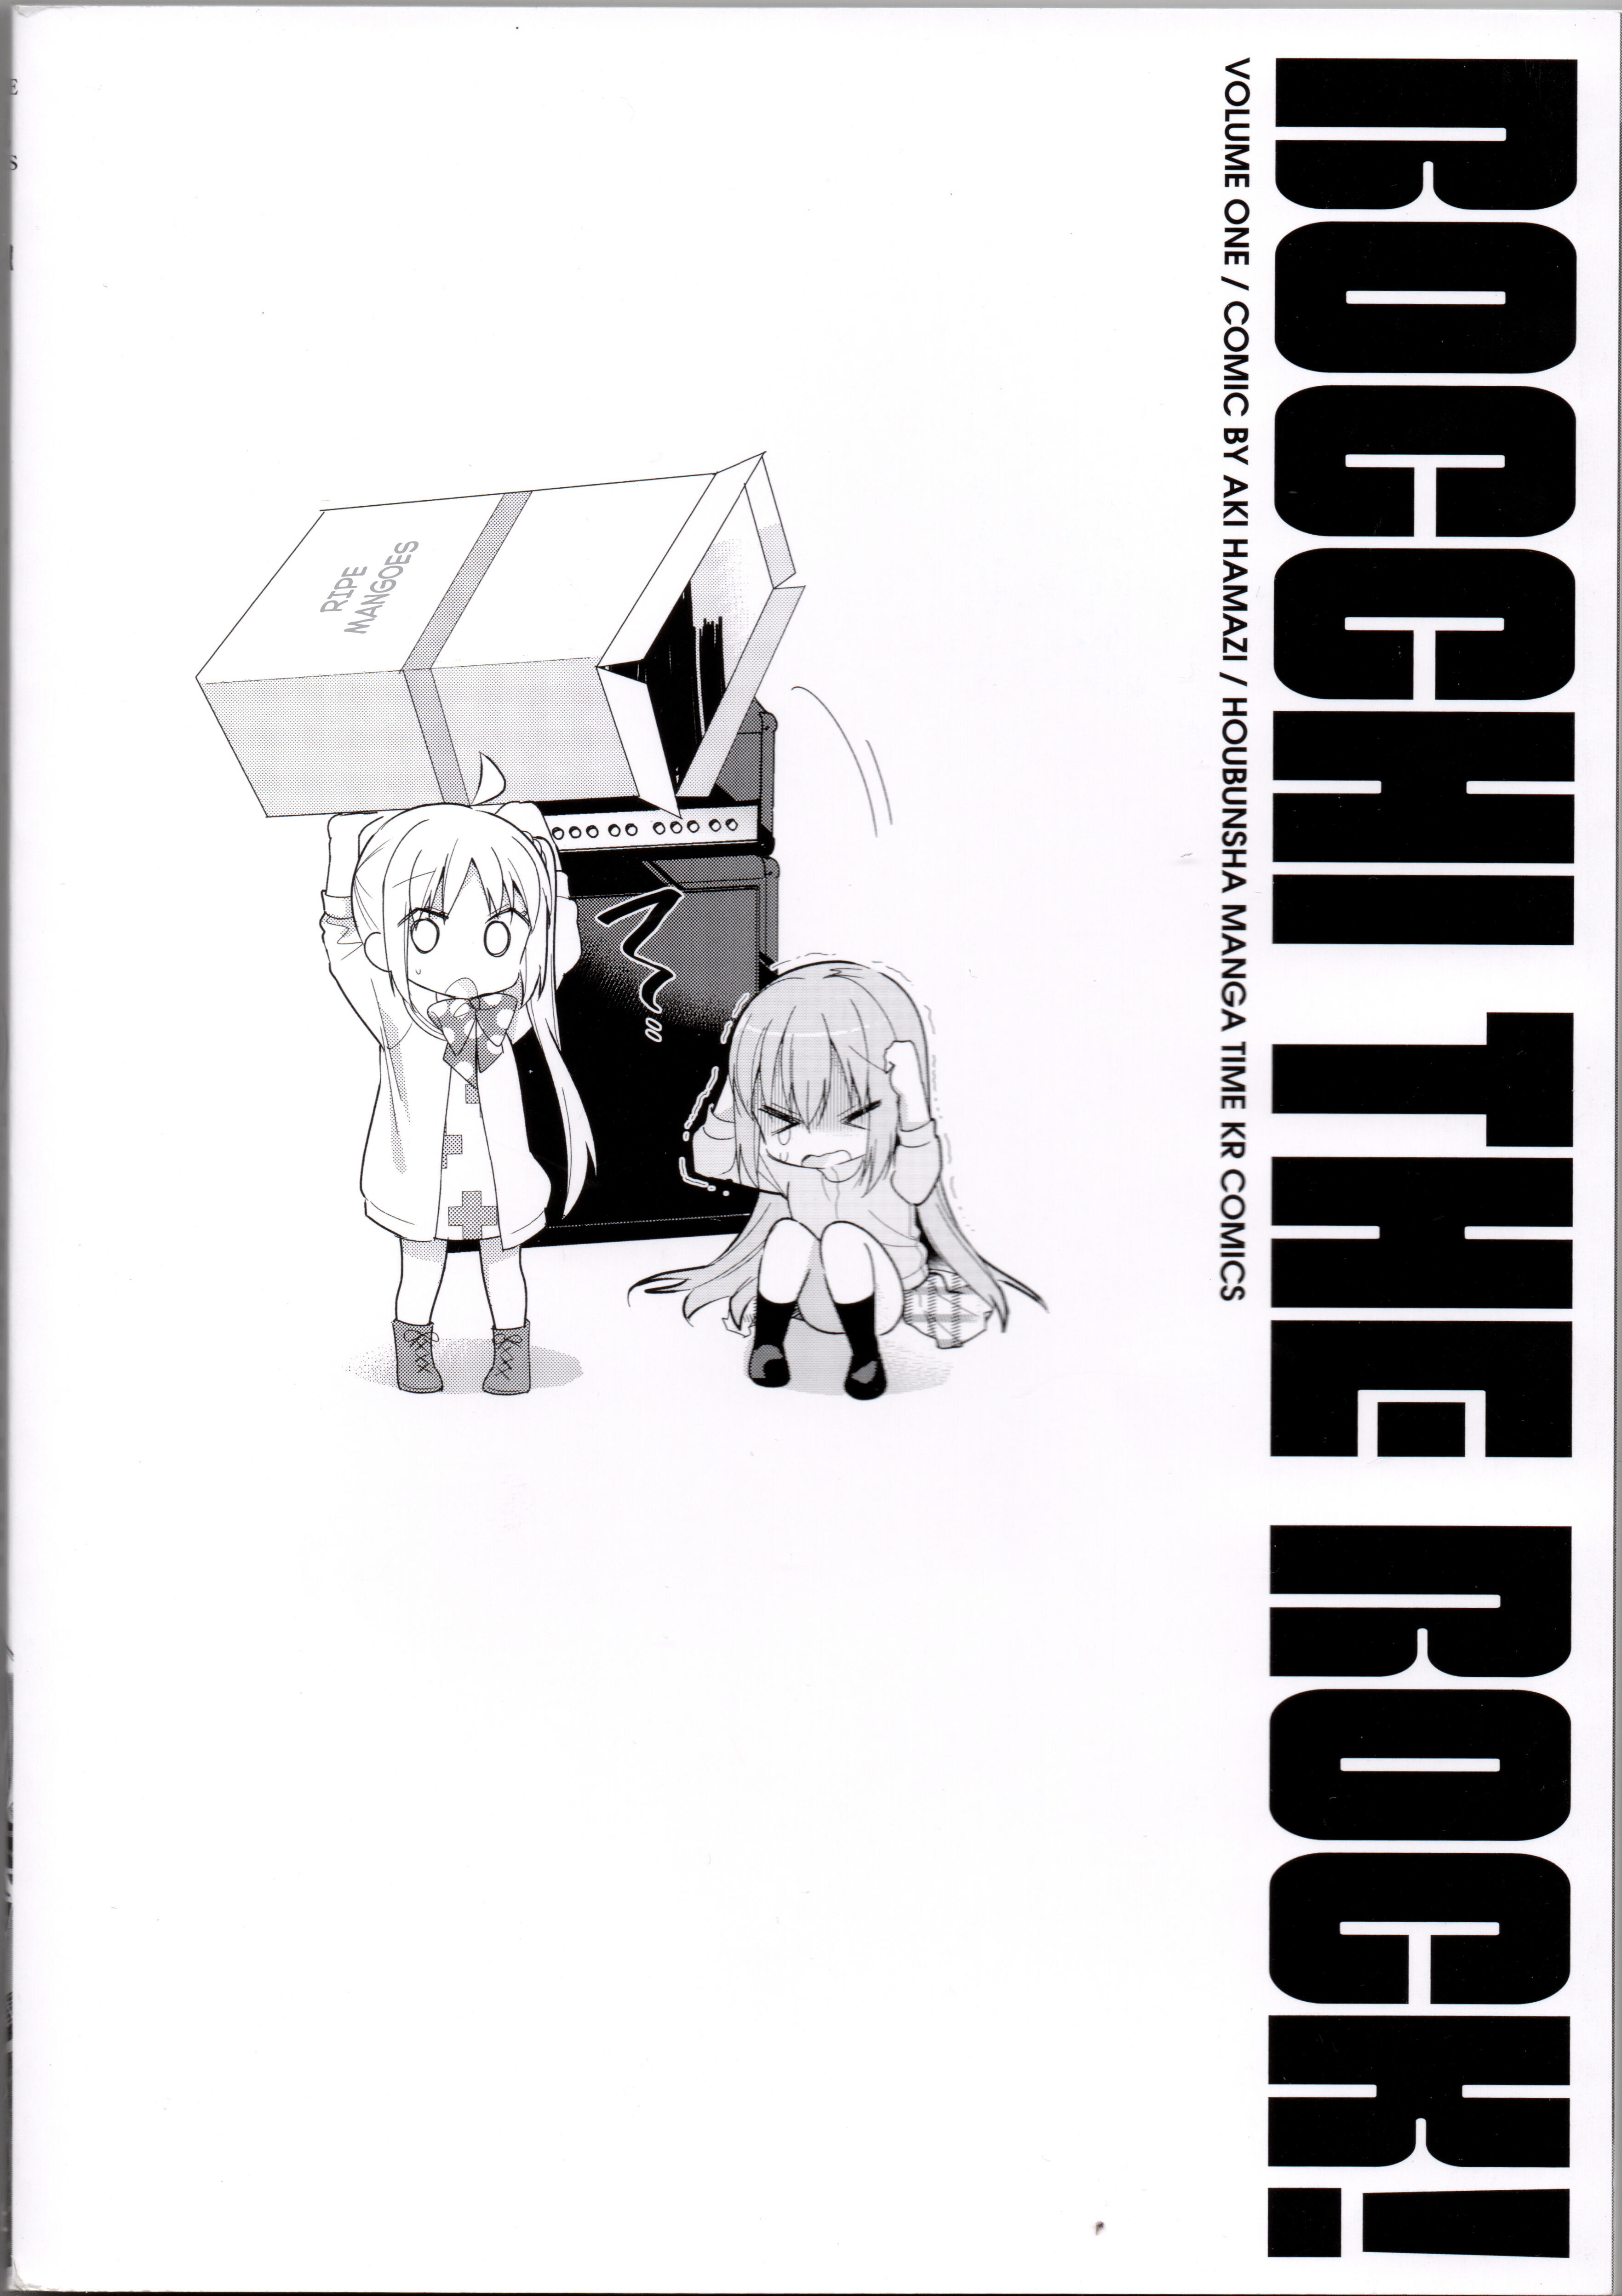 Bocchi The Rock  Chapter 13.5: Volume 1 Extras page 3 - 